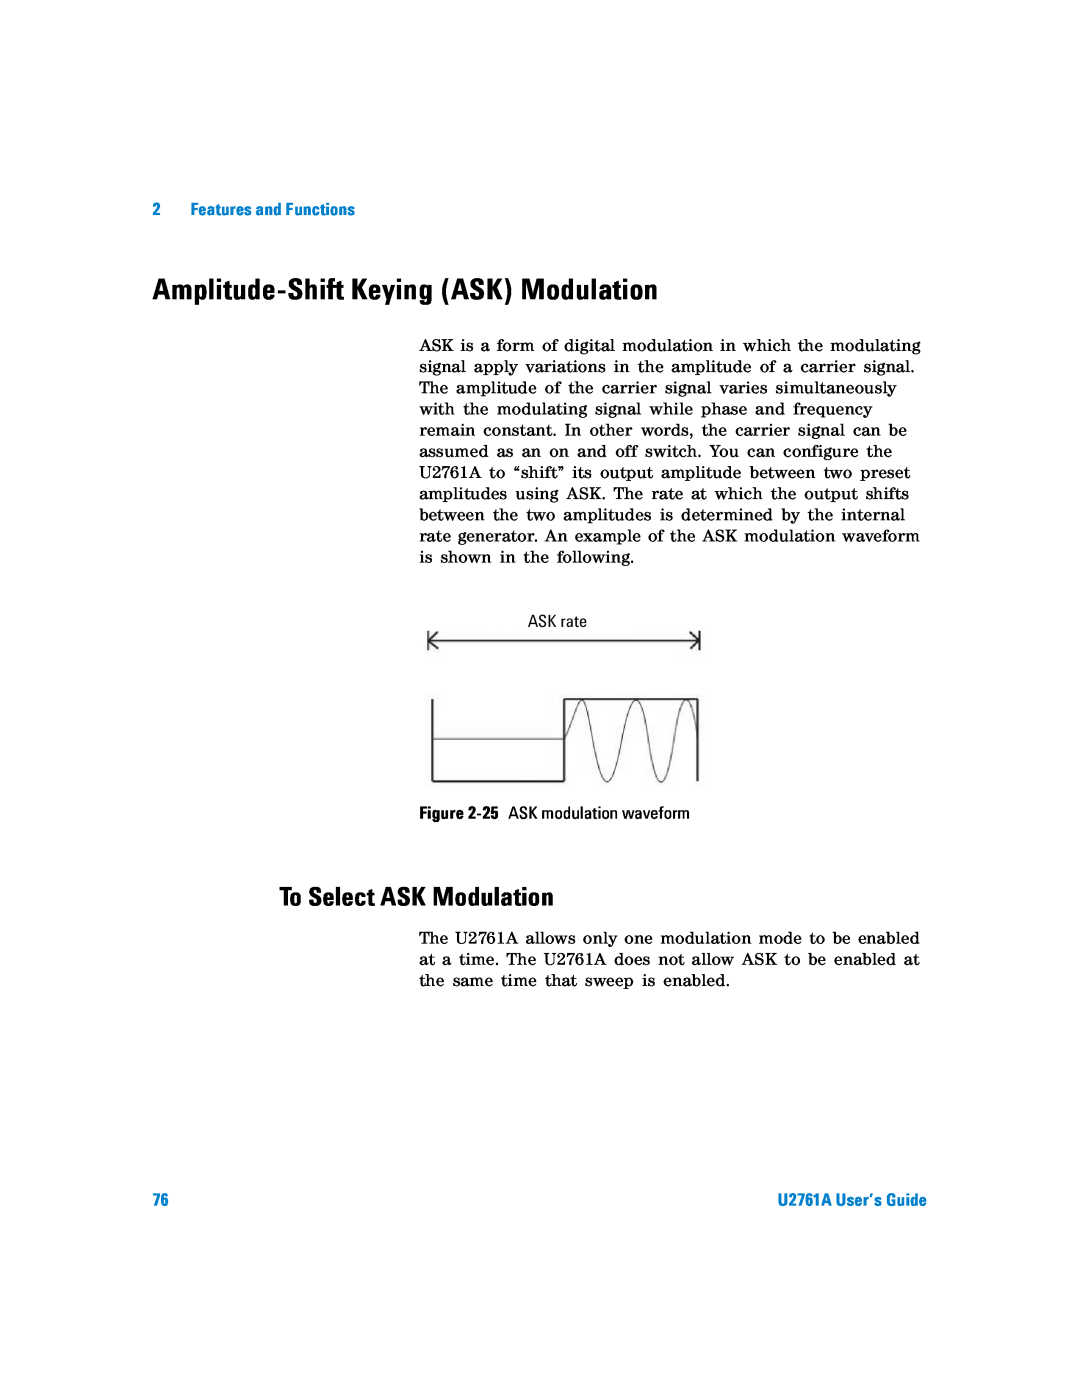 Agilent Technologies U2761A manual Amplitude-Shift Keying ASK Modulation, To Select ASK Modulation, Features and Functions 